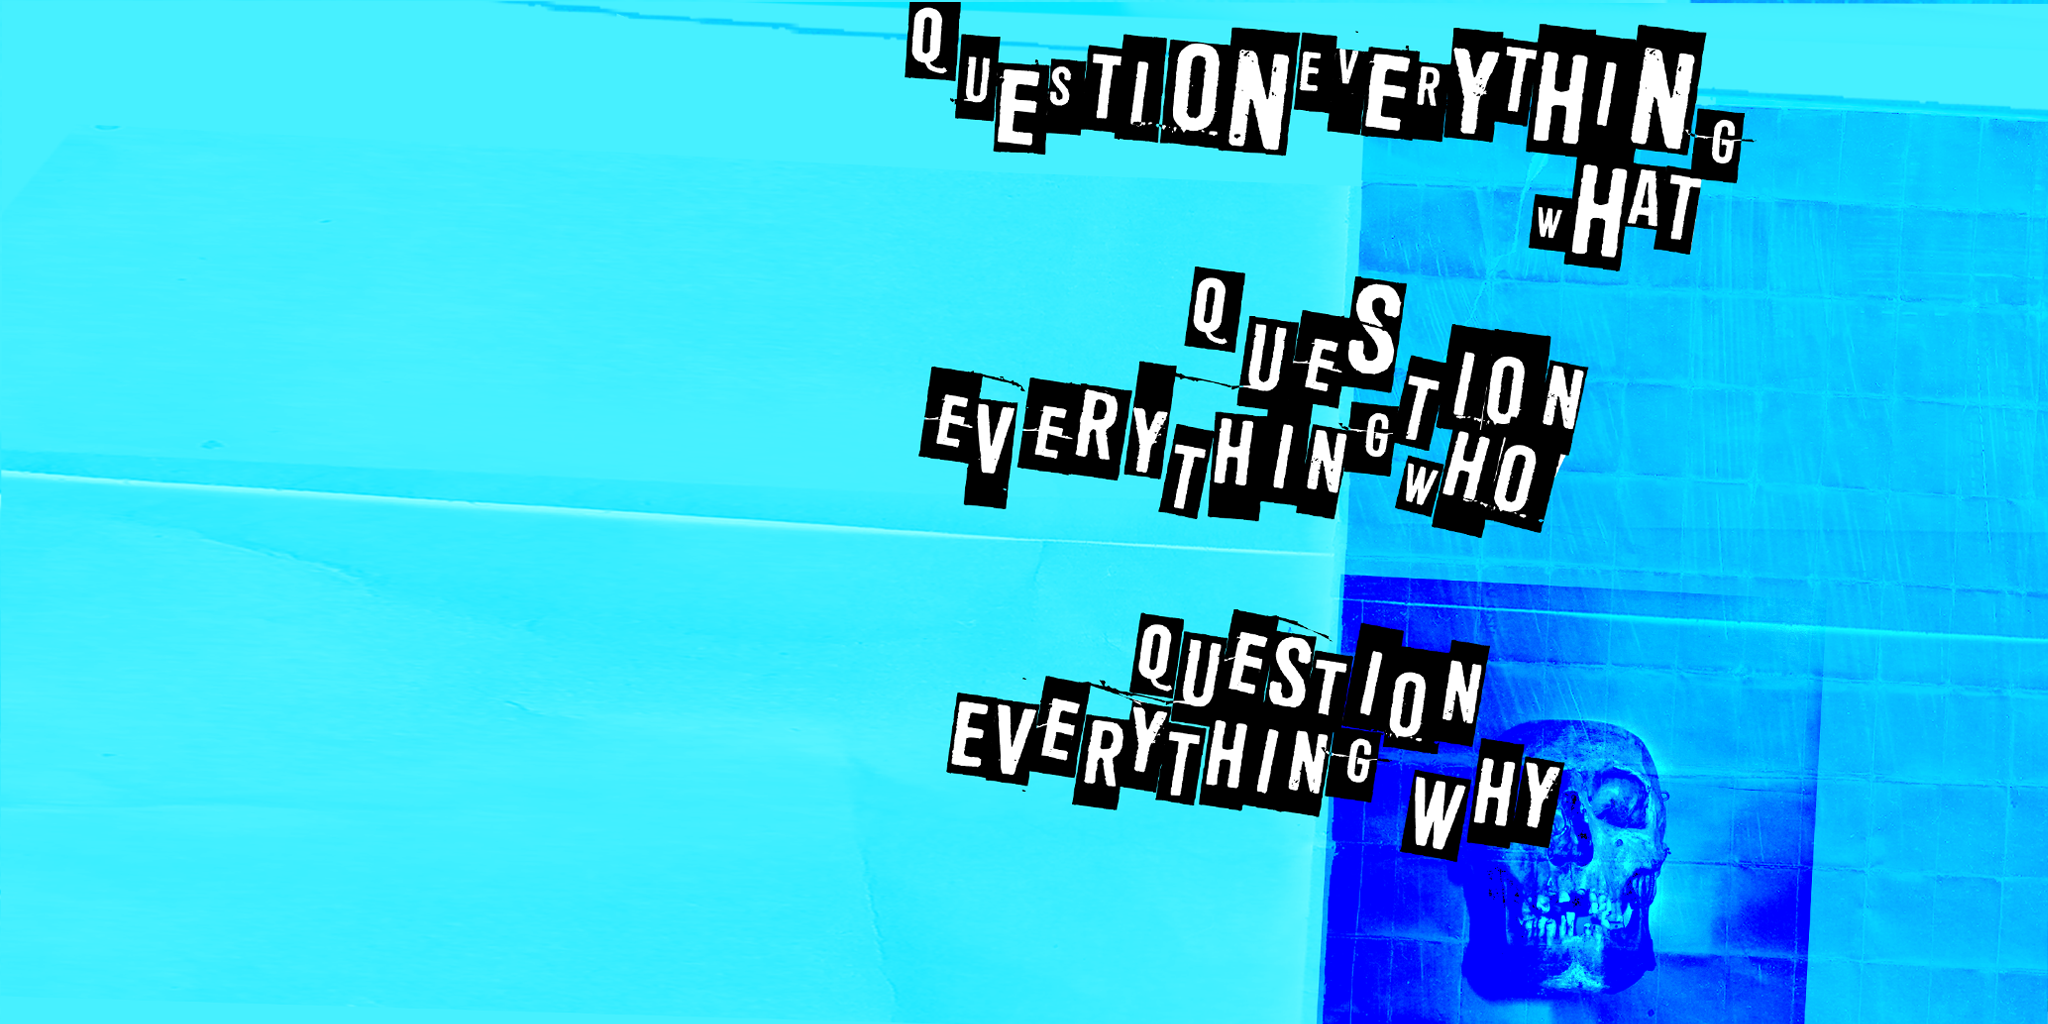 Question Everything